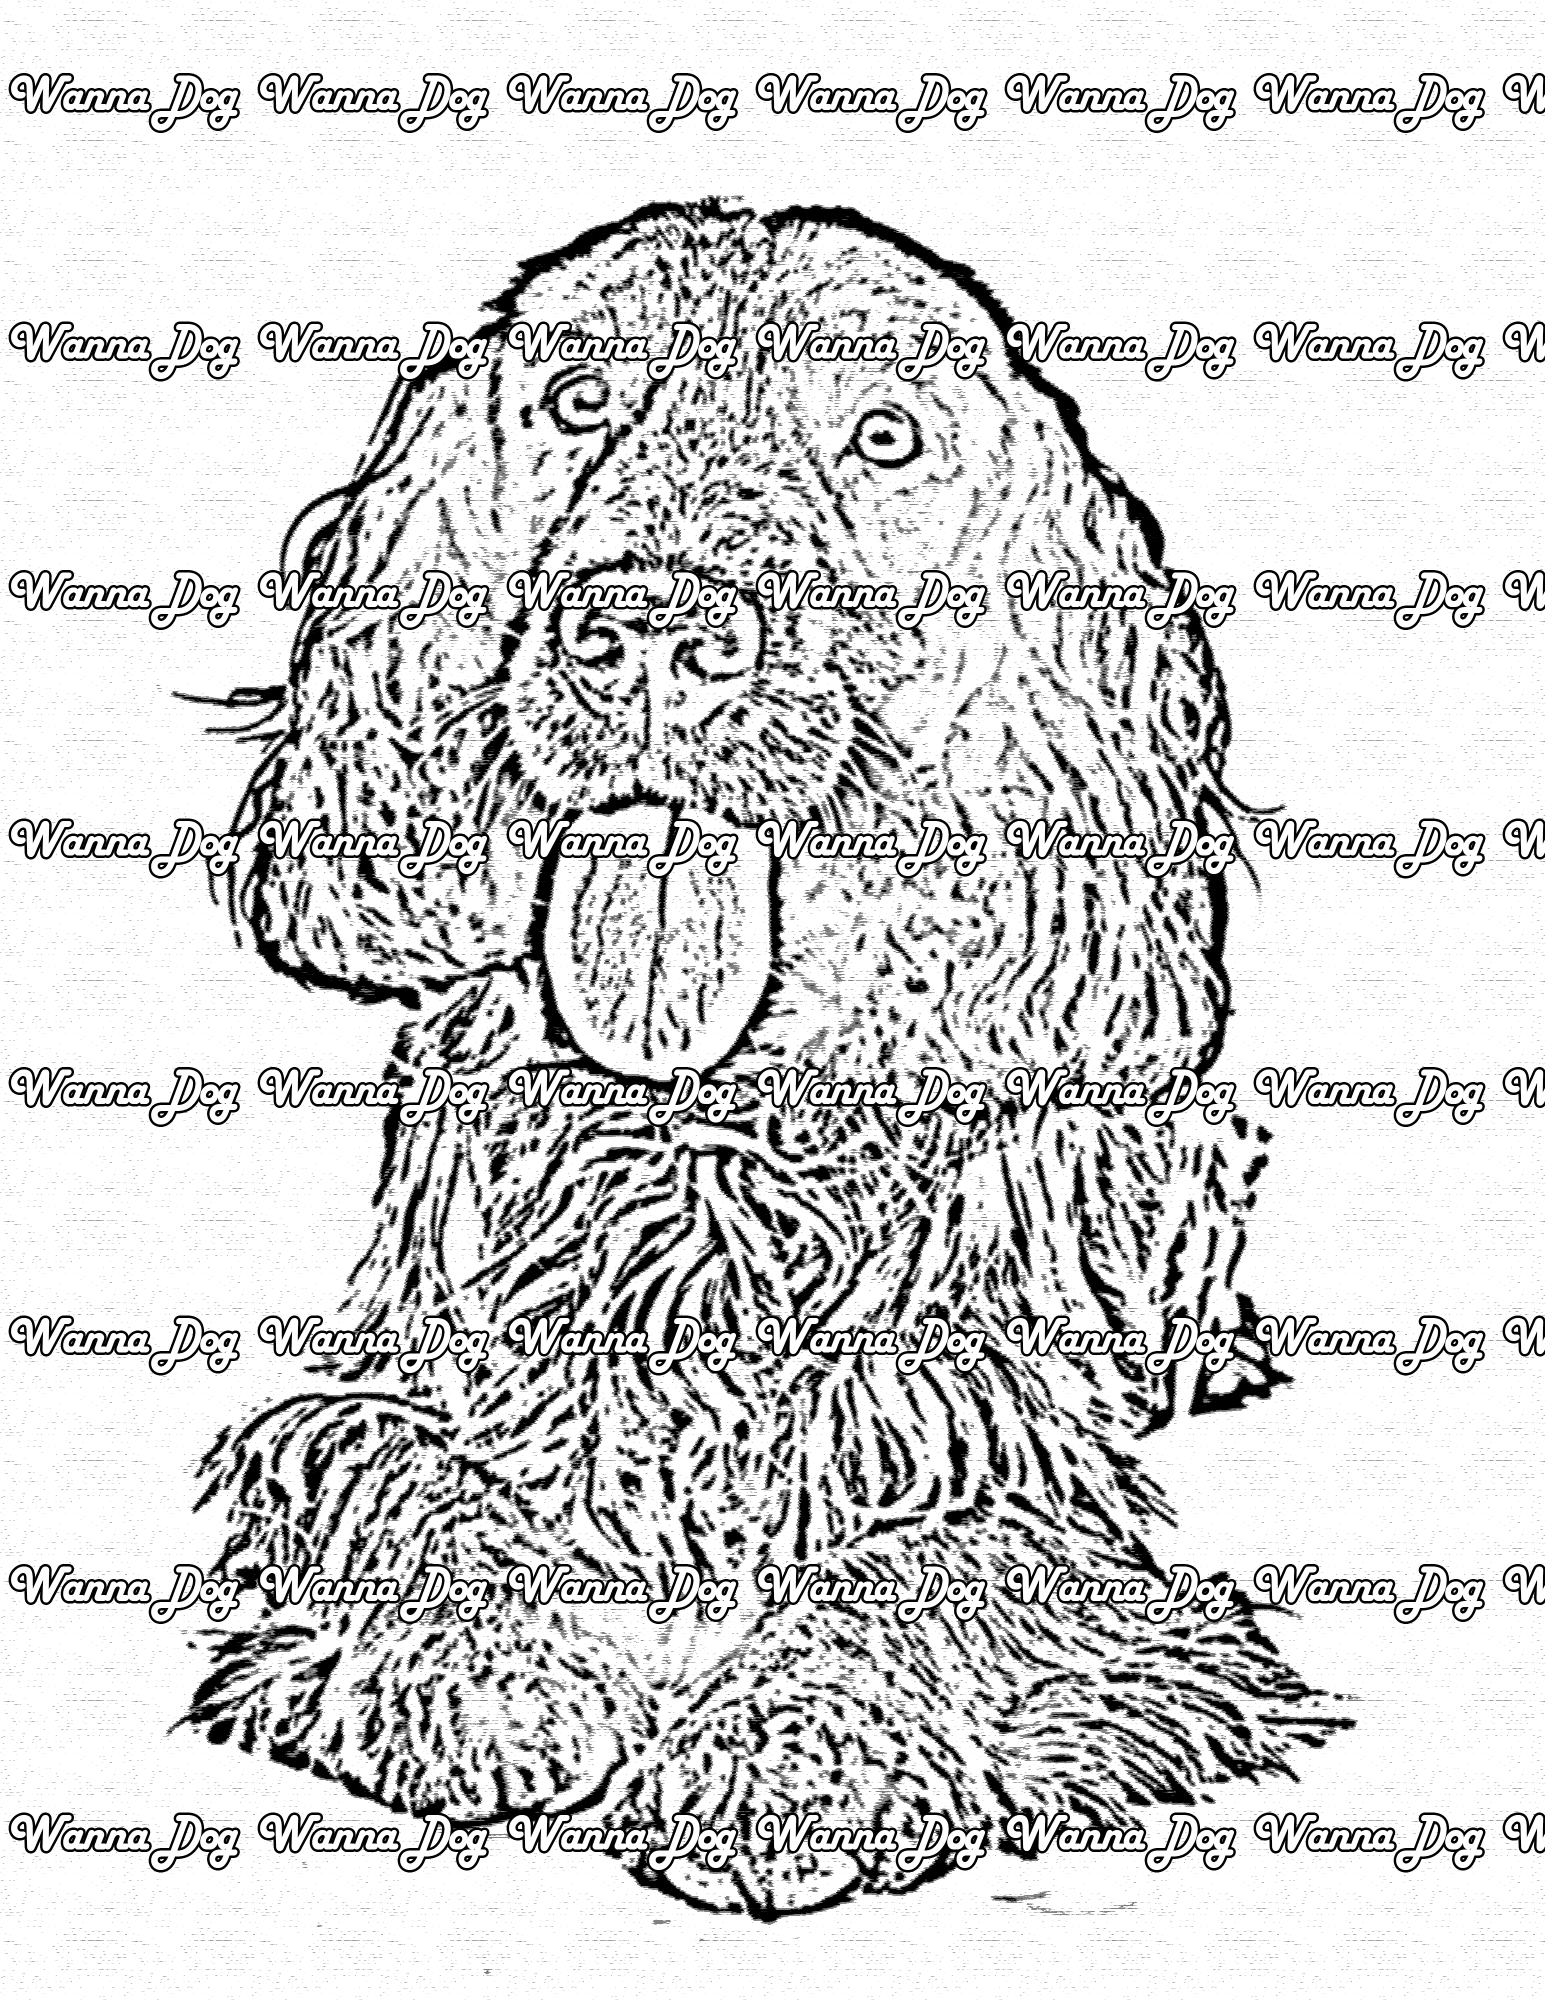 Cocker Spaniel Coloring Pages of a Cocker Spaniel smiling with their tongue out